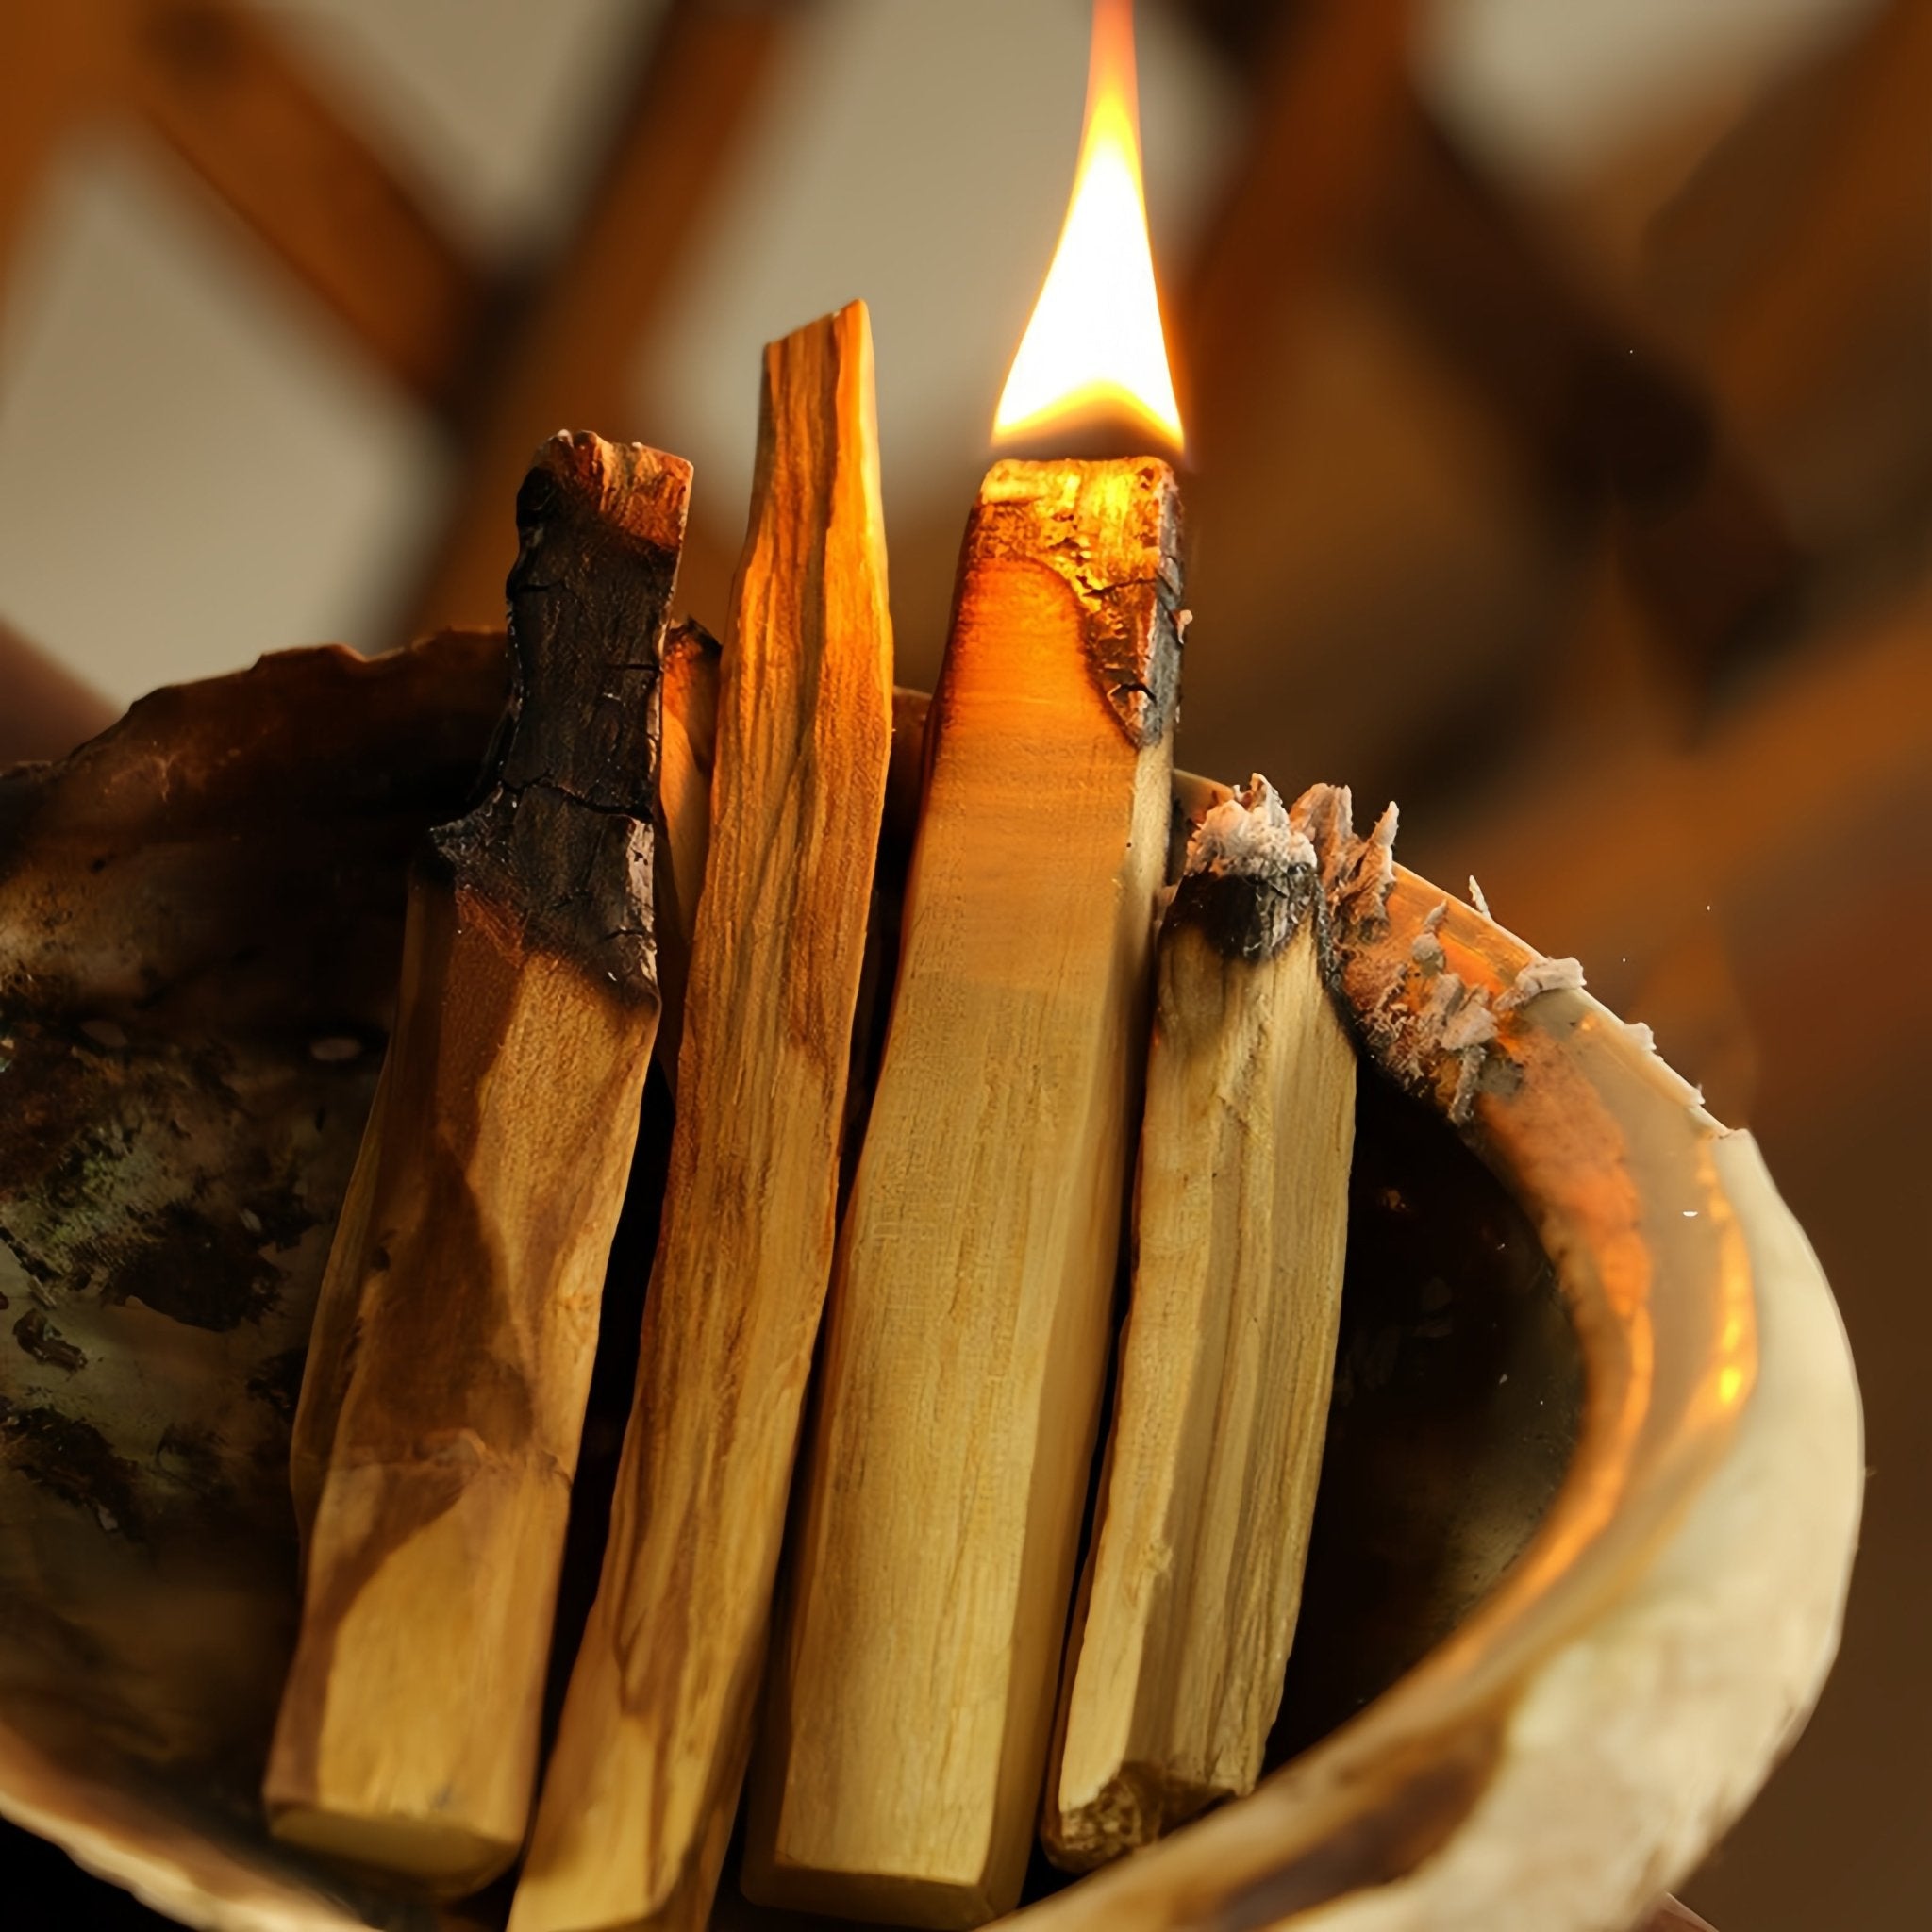 Image of Peruvian Palo Santo wood ignited, showcasing the aroma released during burning.